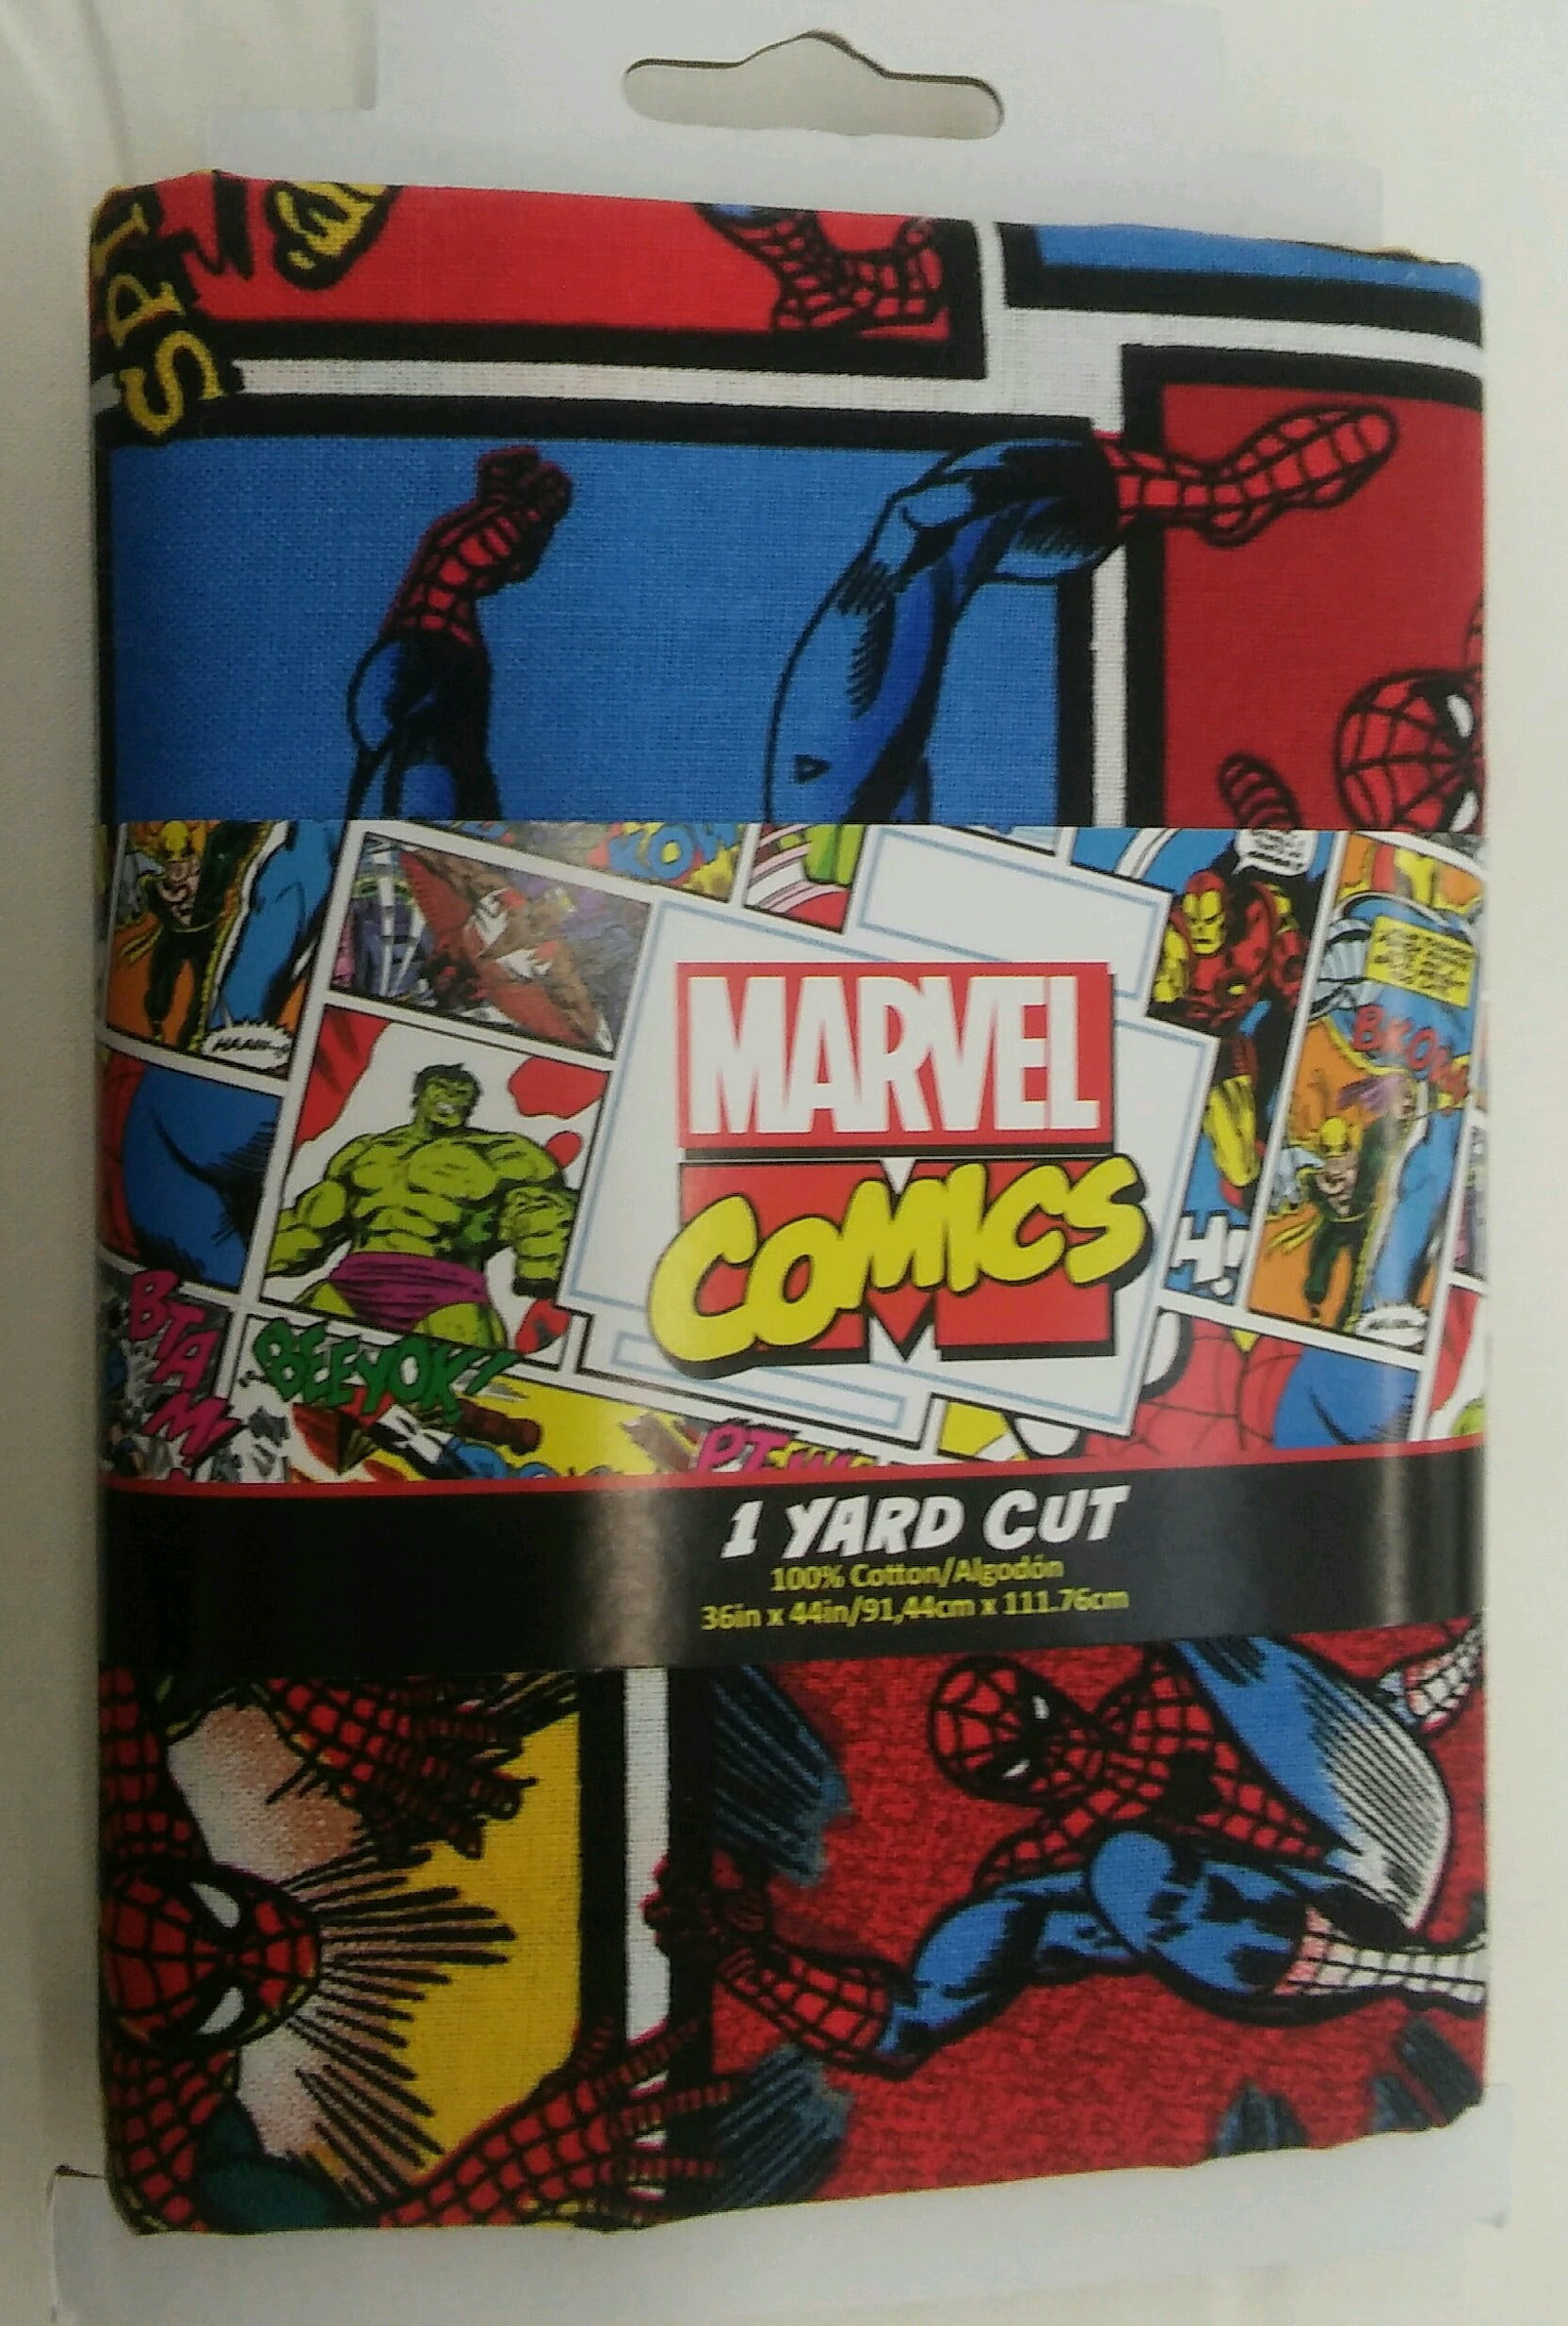  1 Yard - Spiderman Superhero Cotton Fabric - Officially  Licensed (Great for Quilting, Sewing, Craft Projects, Throw Blankets &  More) 1 Yard X 44 : Arts, Crafts & Sewing